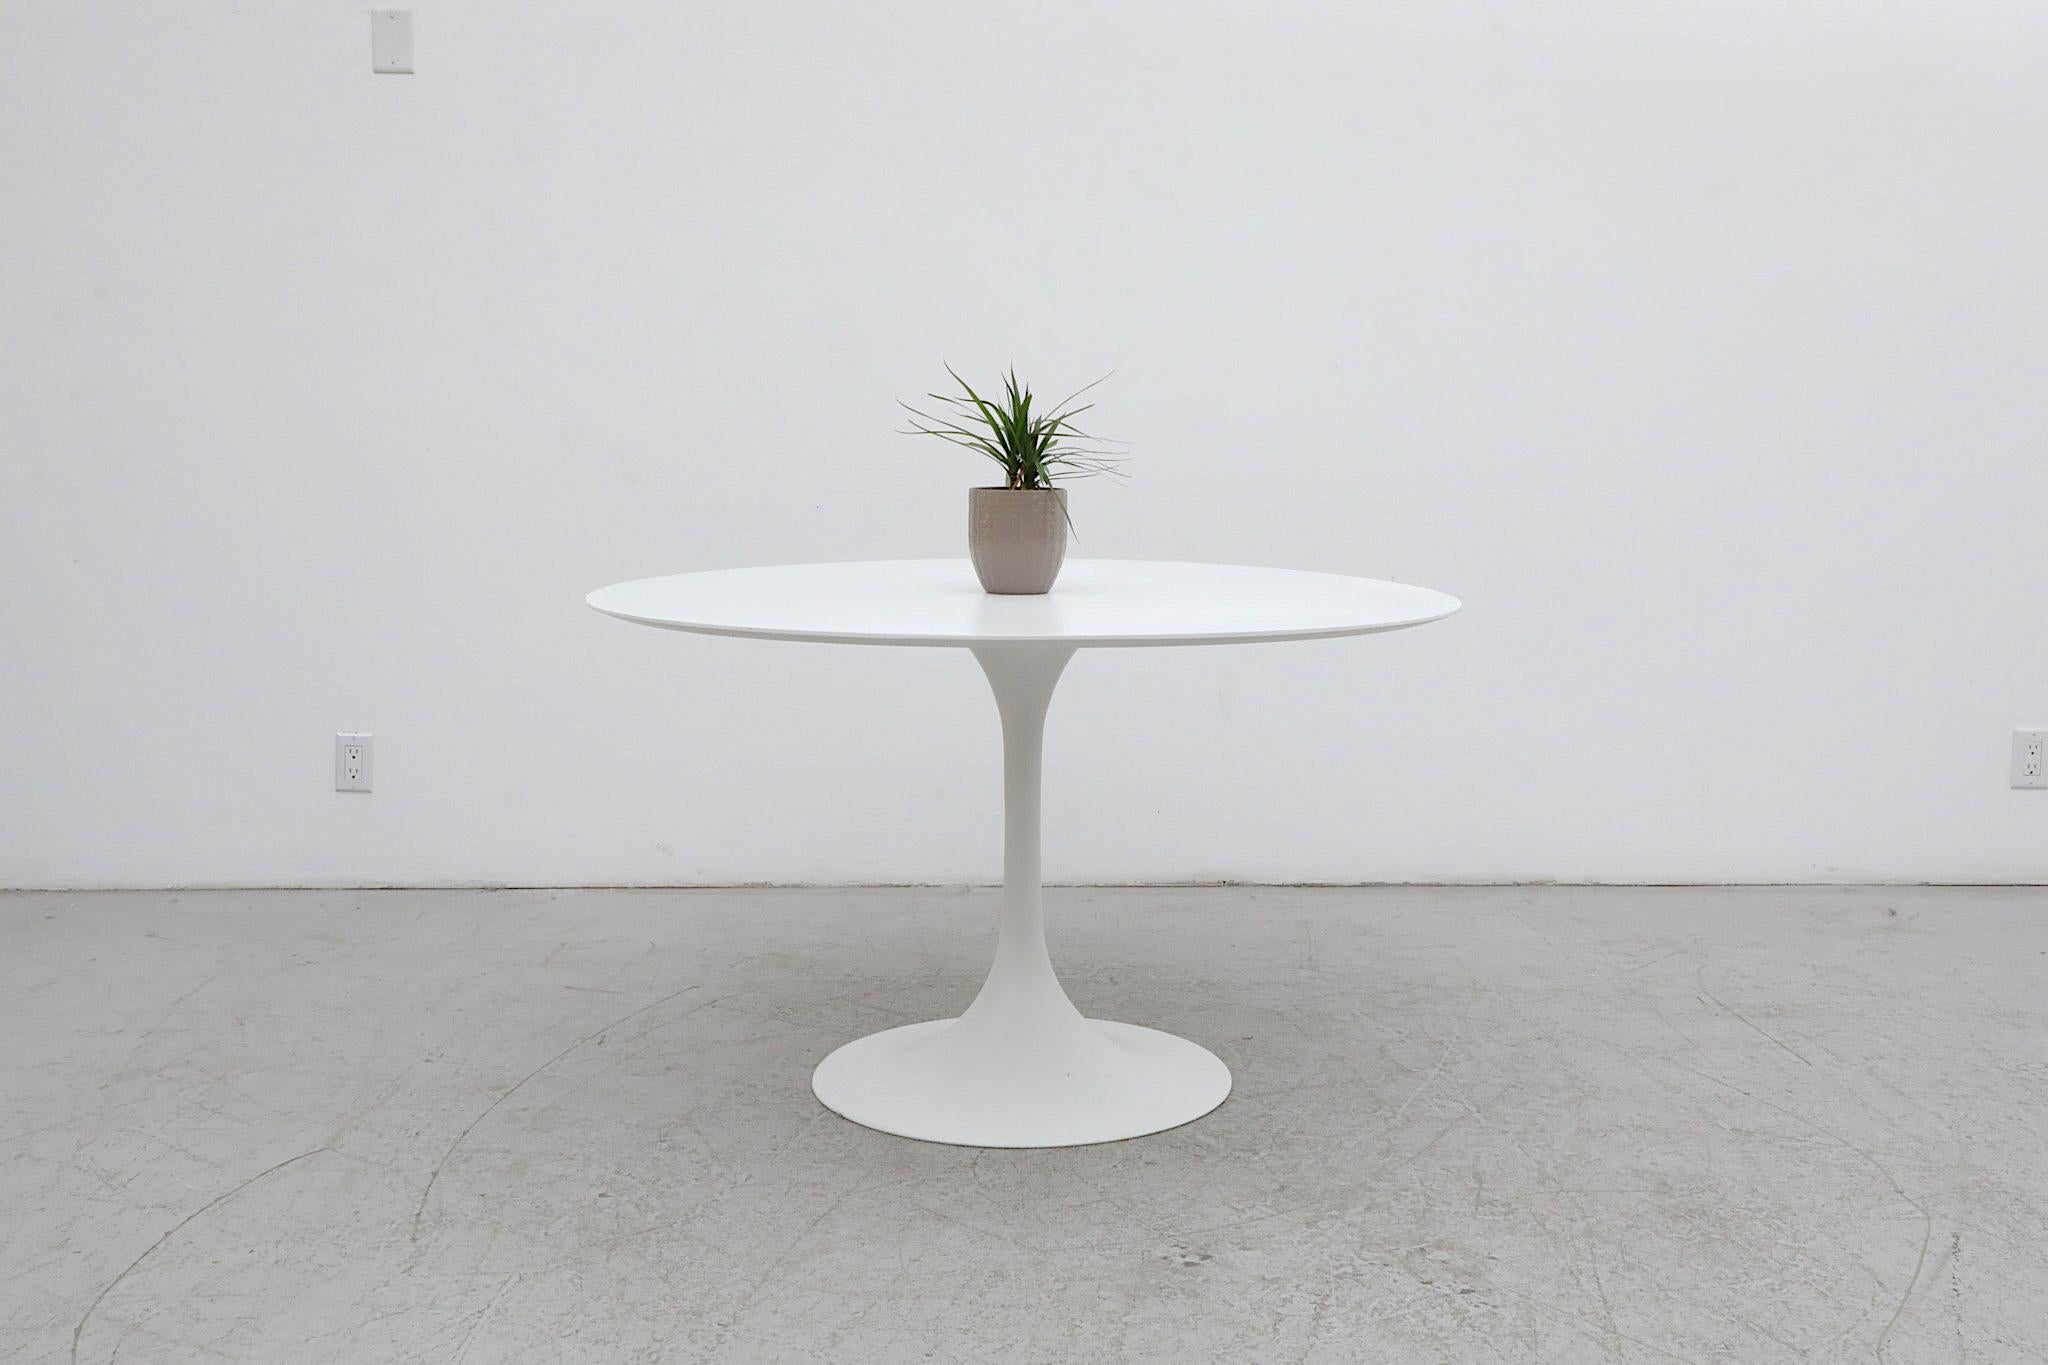 Sleek and stylish all white tulip base dining table designed by Cees Braakman in the style of Eero Saarinen for Pastoe. The Netherlands. It can be said that Braakman was almost literally born to design for the company having been born above the